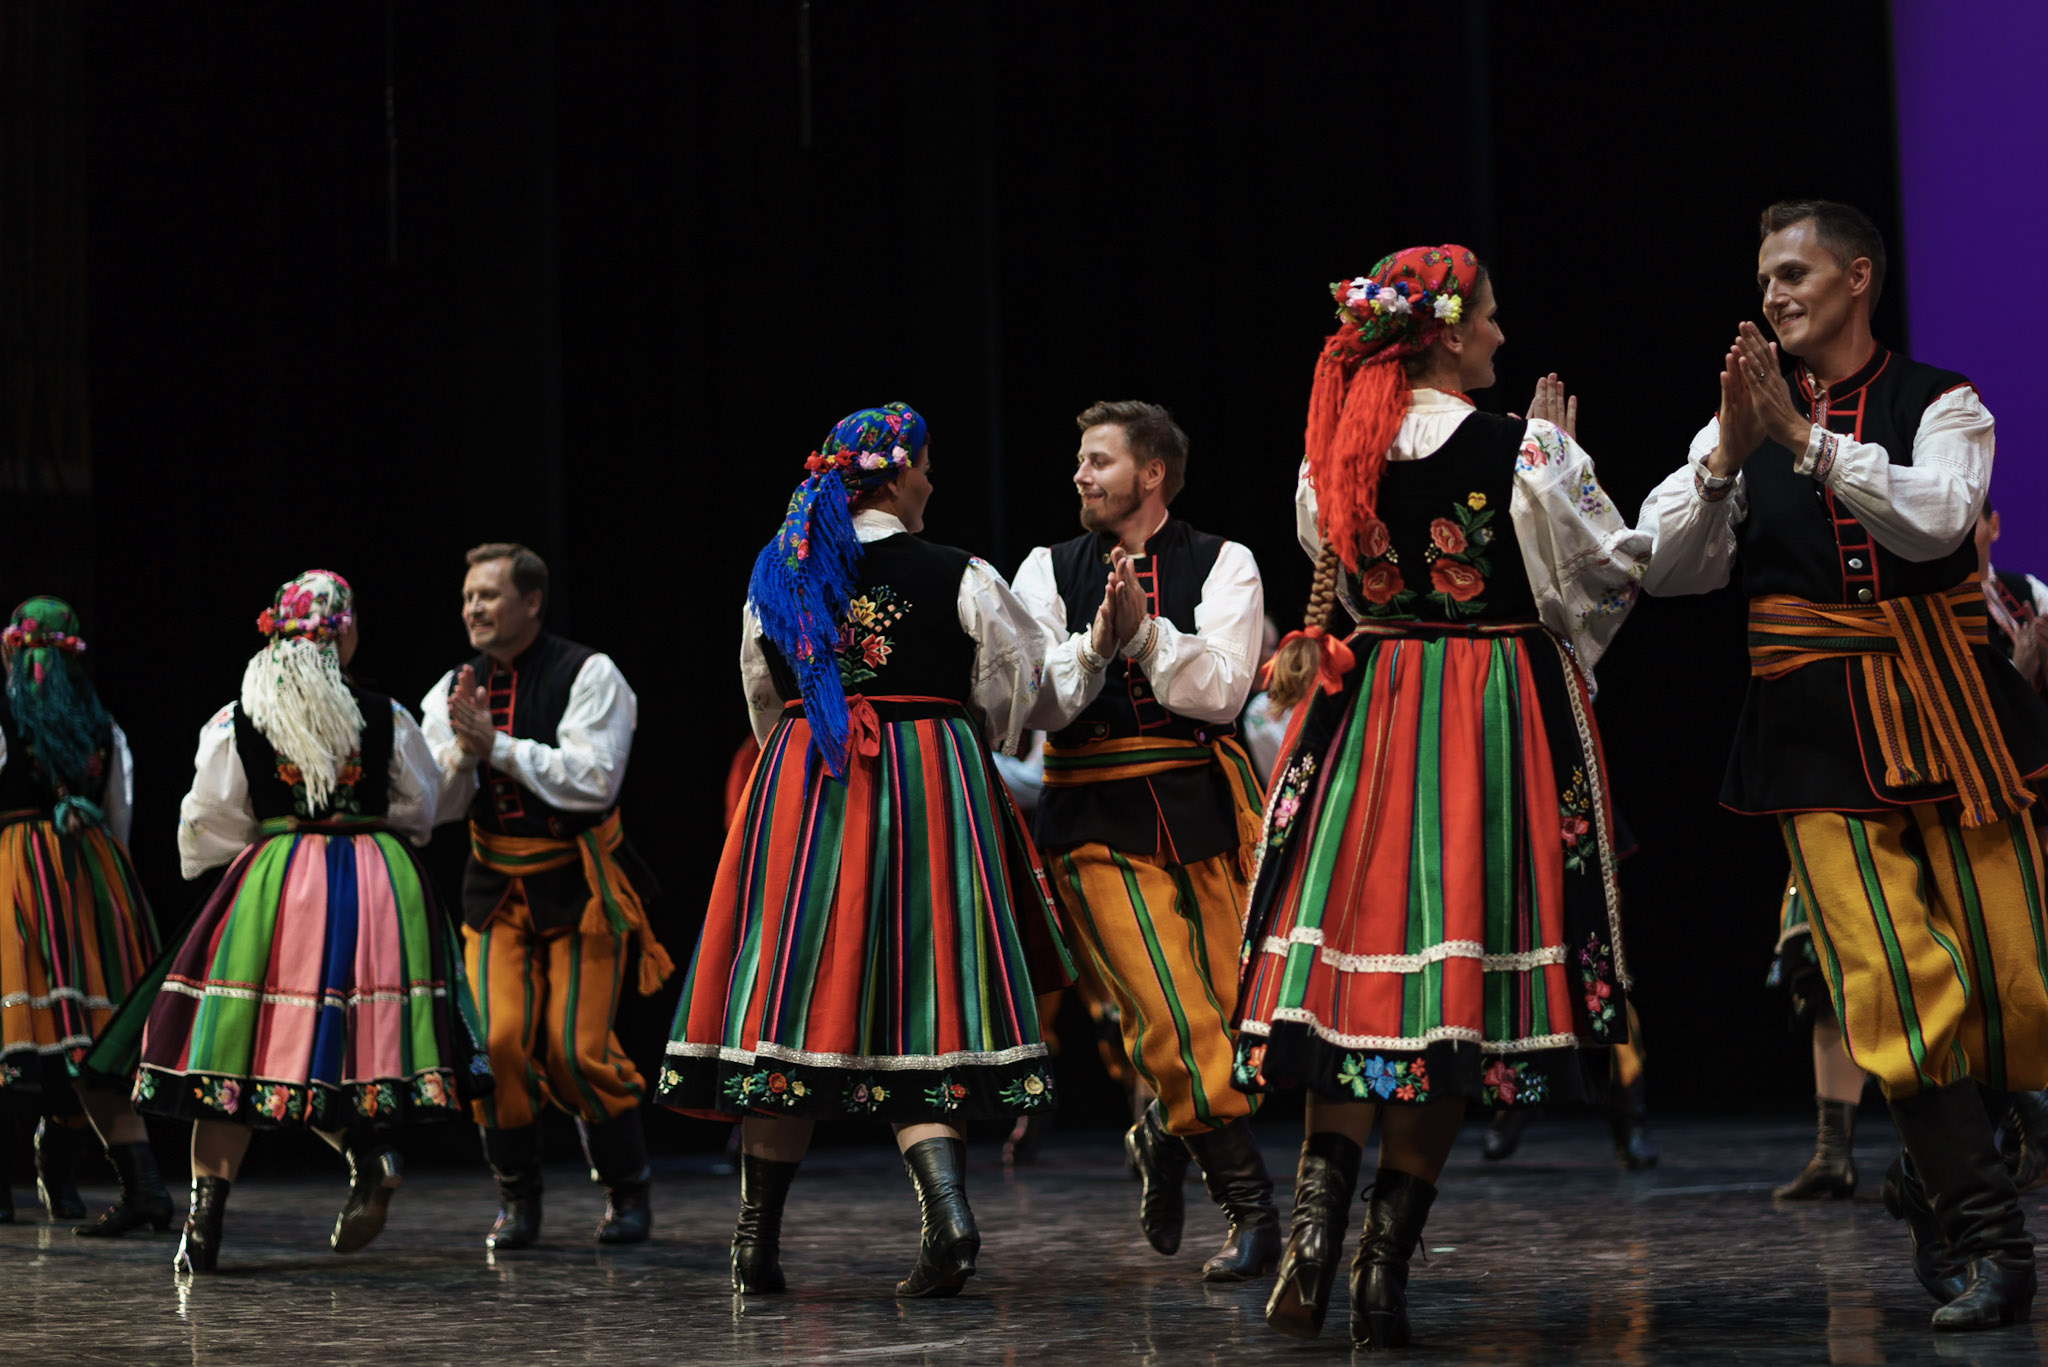 This is a very popular dance from the Mazowsze region because of its beautiful medleys of songs and dances. The elegant and uniquely embroidered costumes depict the region's rich landscape filled with beautiful plains and luscious forests.﻿